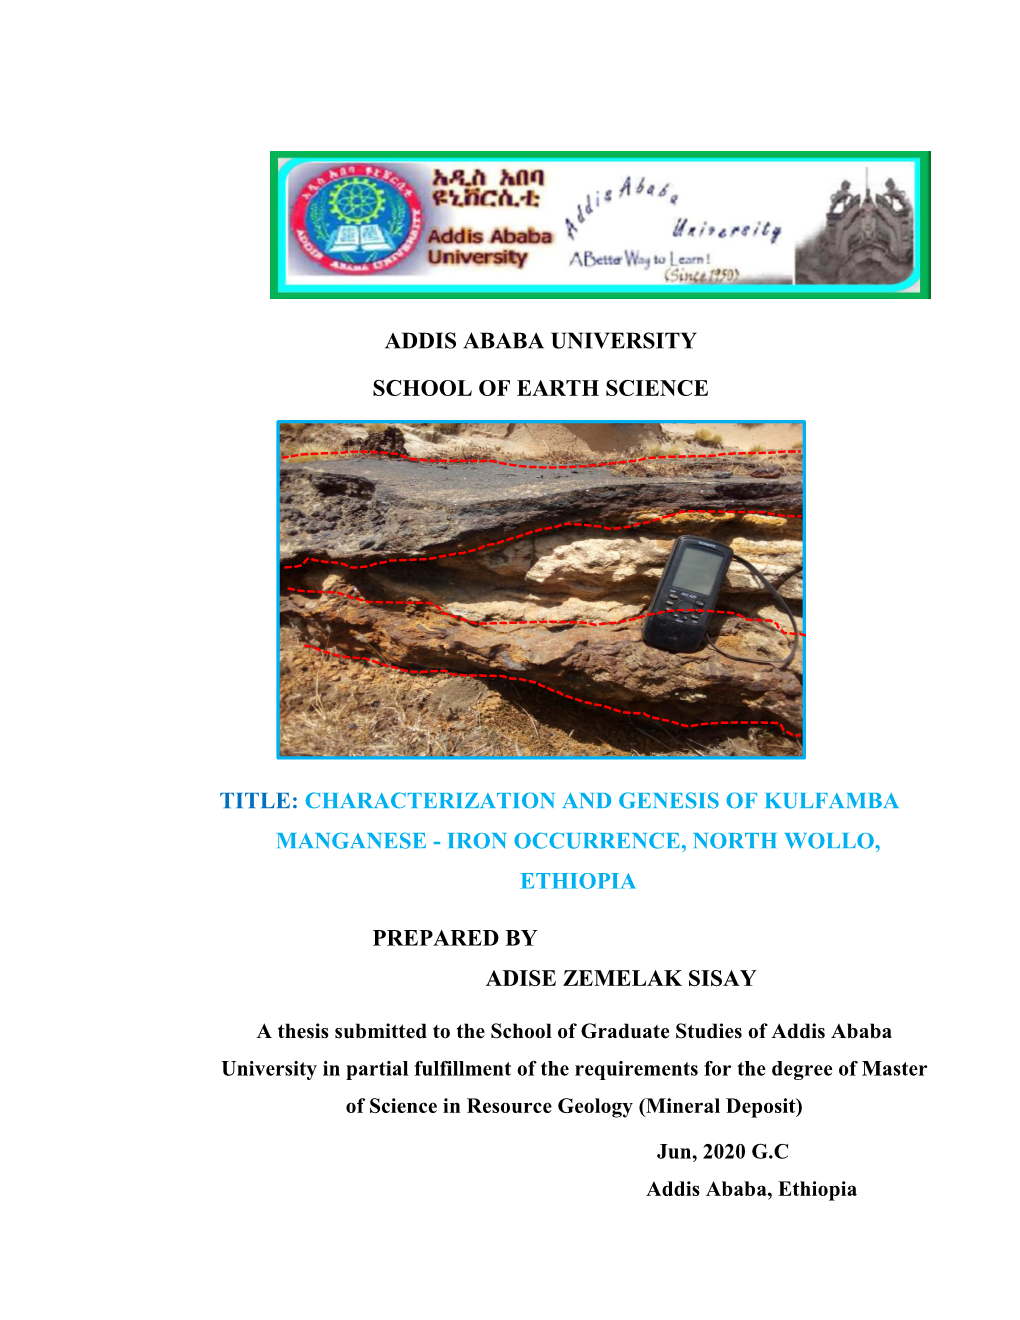 Addis Ababa University School of Earth Science Title